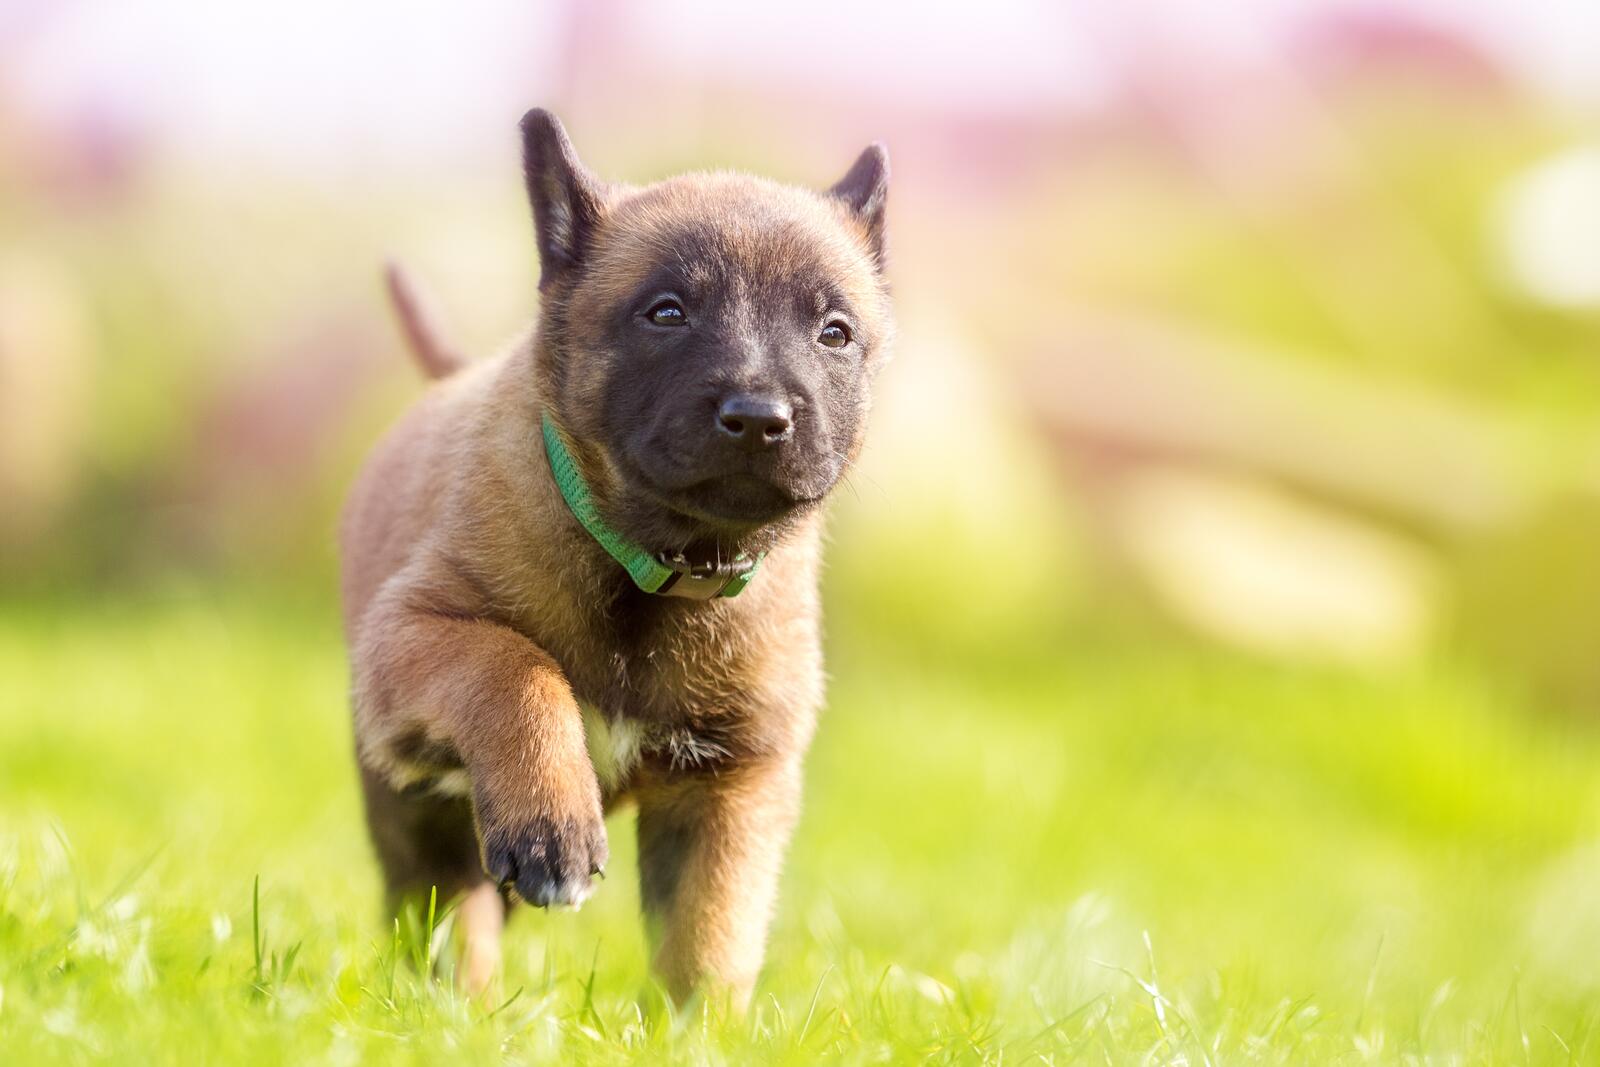 Free photo A little puppy walking in the grass on a sunny day